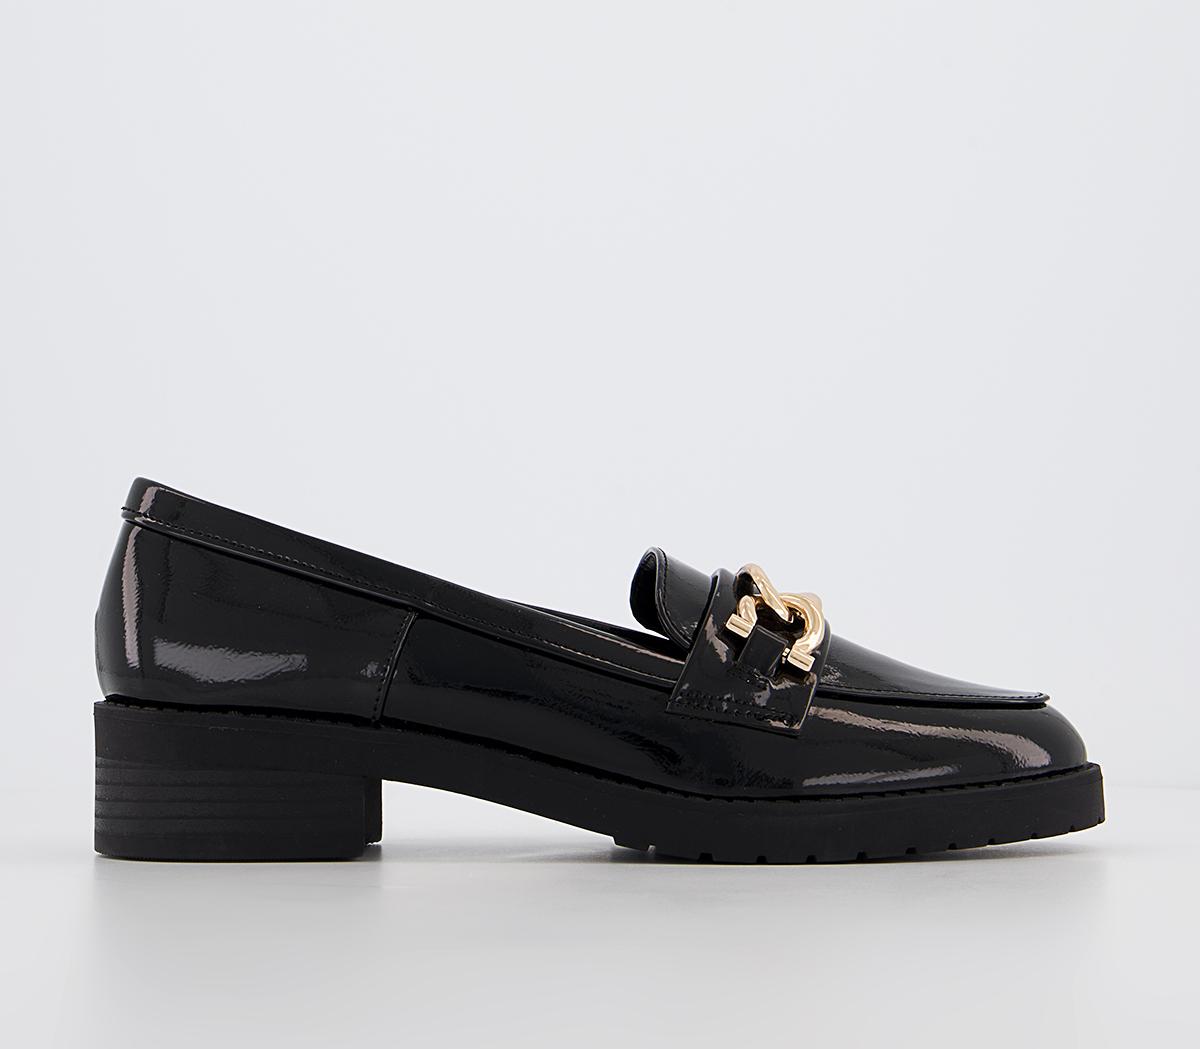 OFFICEFebe Trim Cleat Sole LoafersBlack